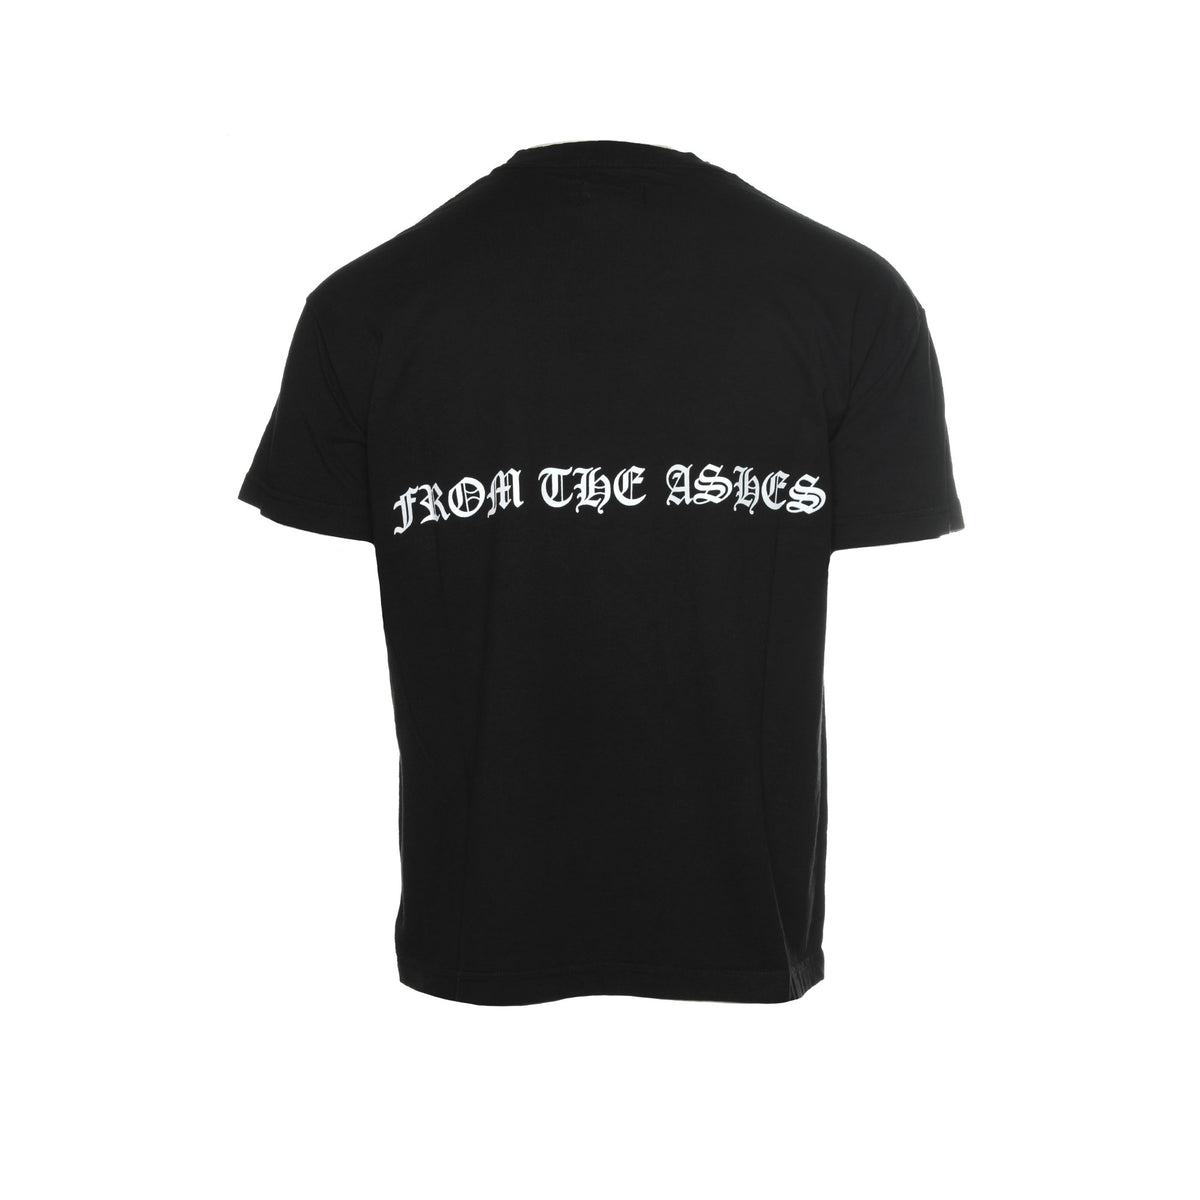 RtA Brand "From The Ashes" Men's Black SS Tee - SIZE Boutique